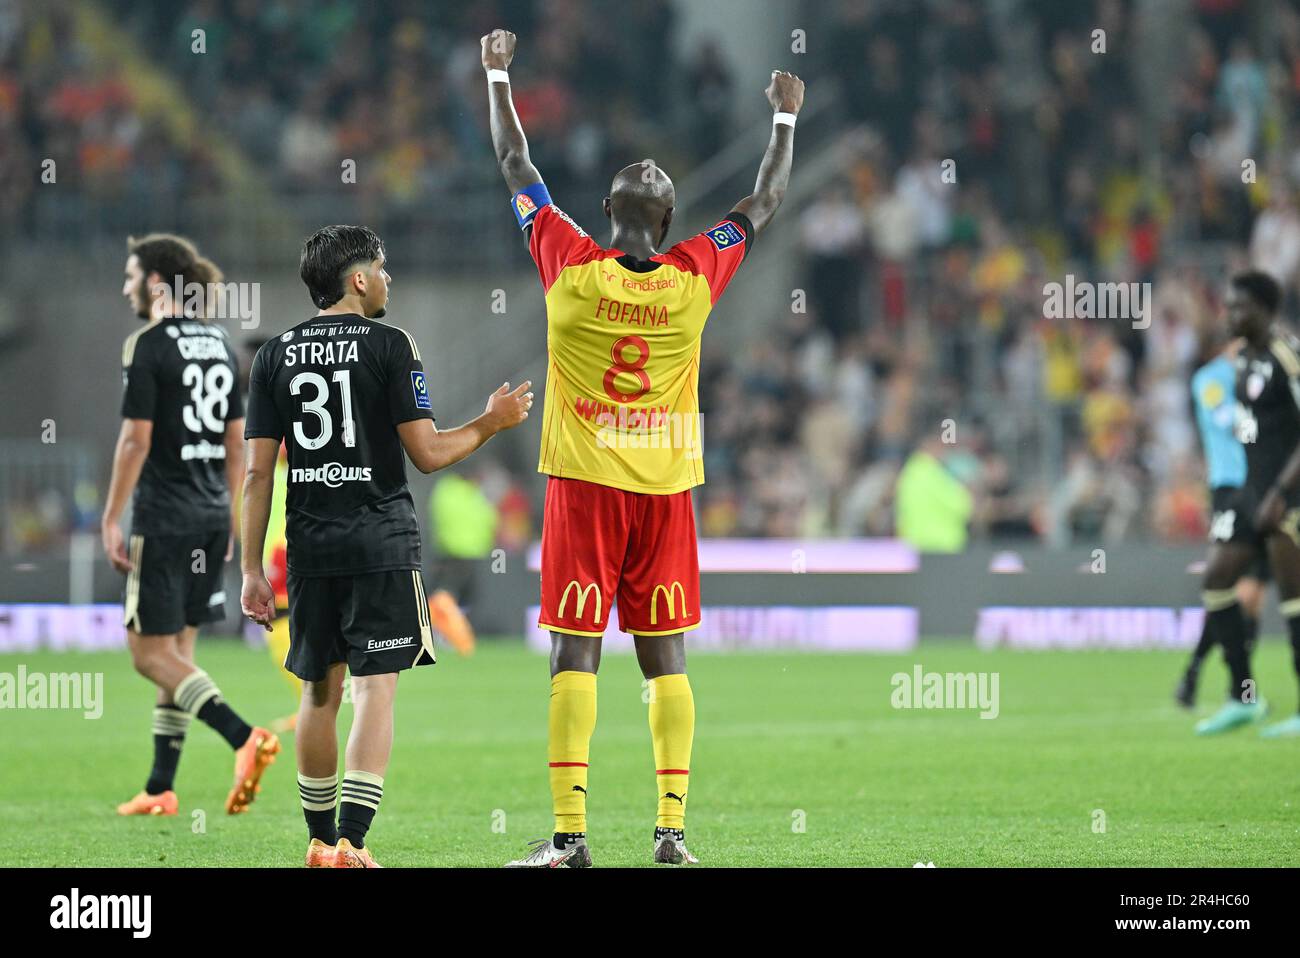 players of RC Lens and their president Joseph Oughourlian pictured  celebrating after winning and qualifying for the Champions League after a  soccer game between t Racing Club de Lens and AC Ajaccio